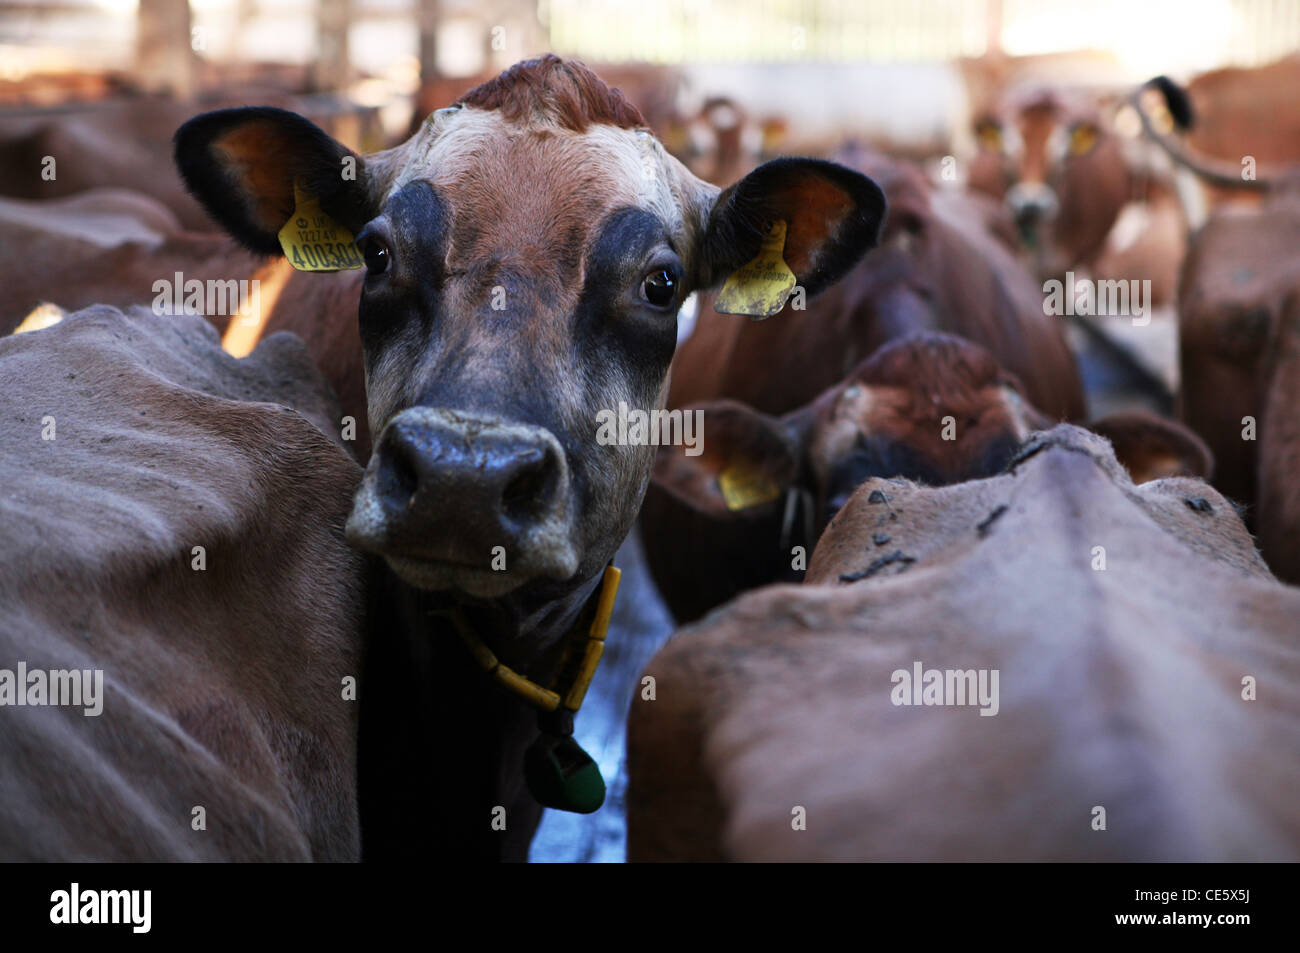 Jersey cows on a dairy farm in North Yorkshire, UK. 2011. Photograph: Stuart Boulton/Alamy Stock Photo